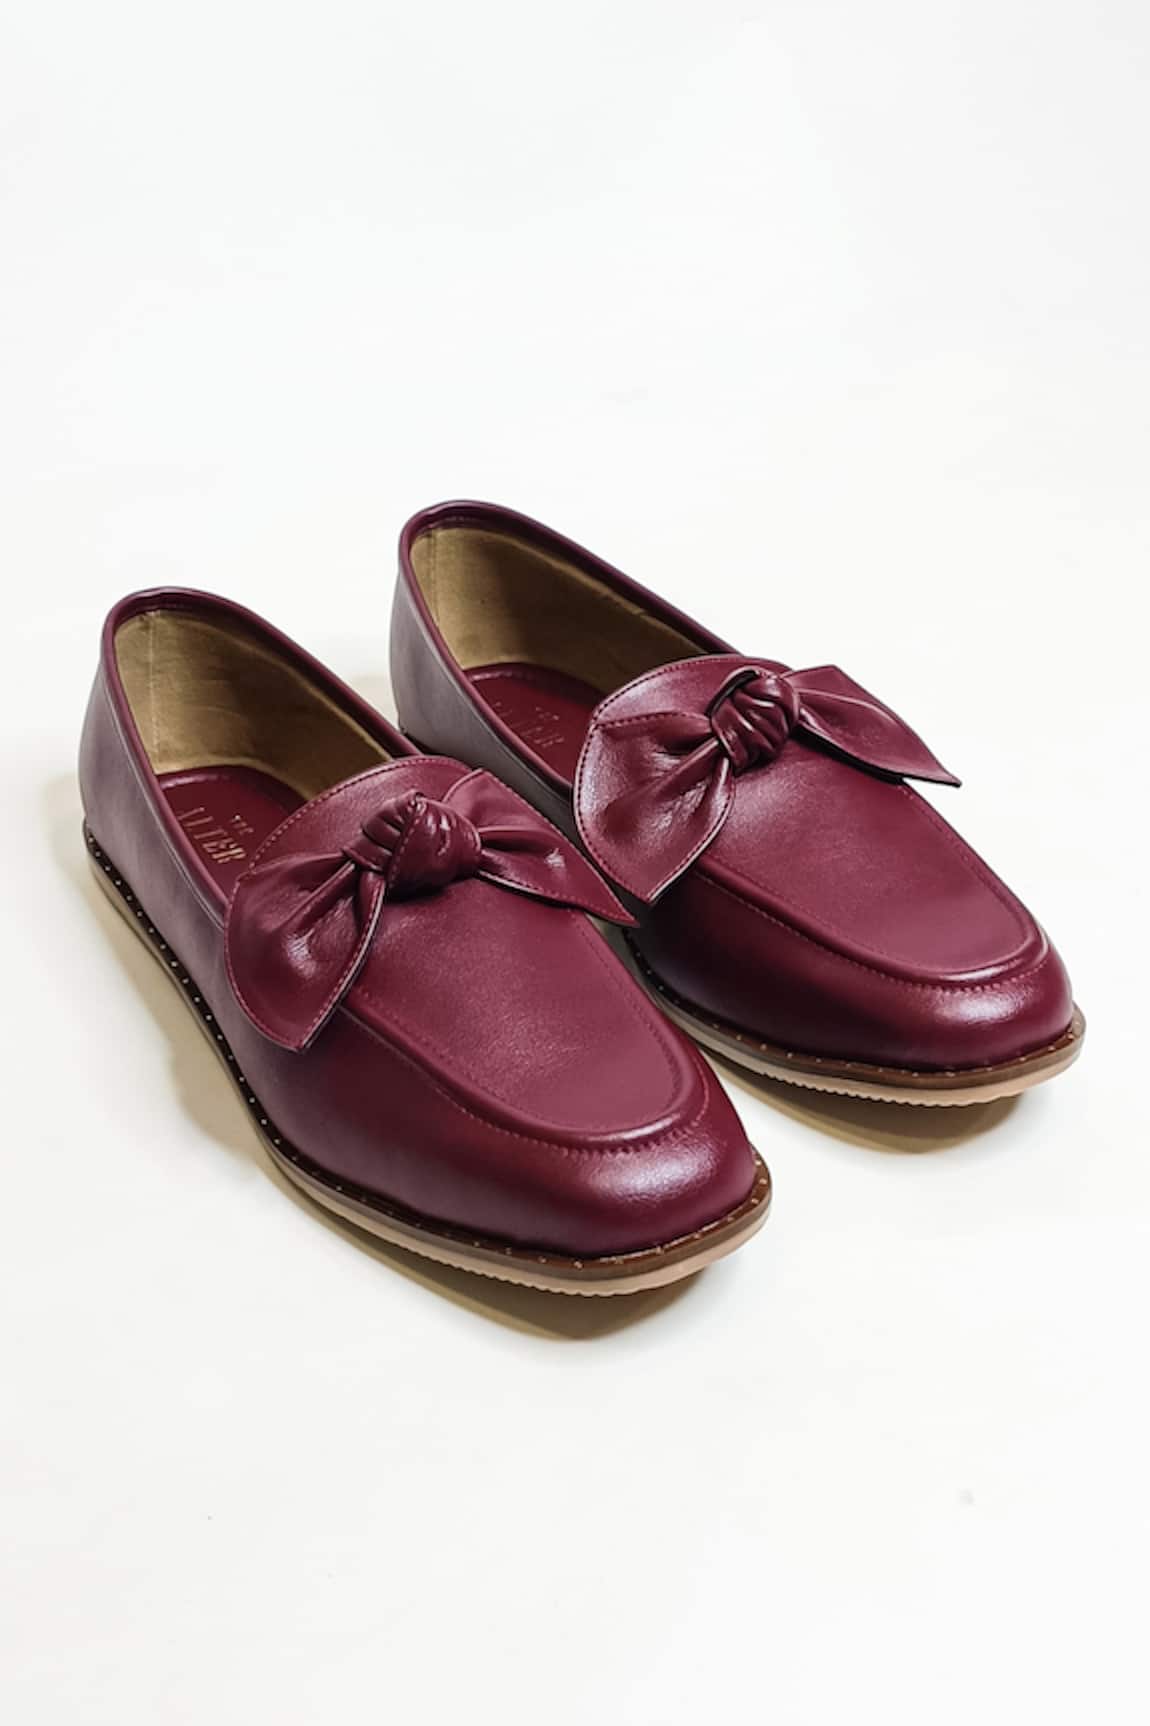 THE ALTER Daisy Twisted Bow Loafers